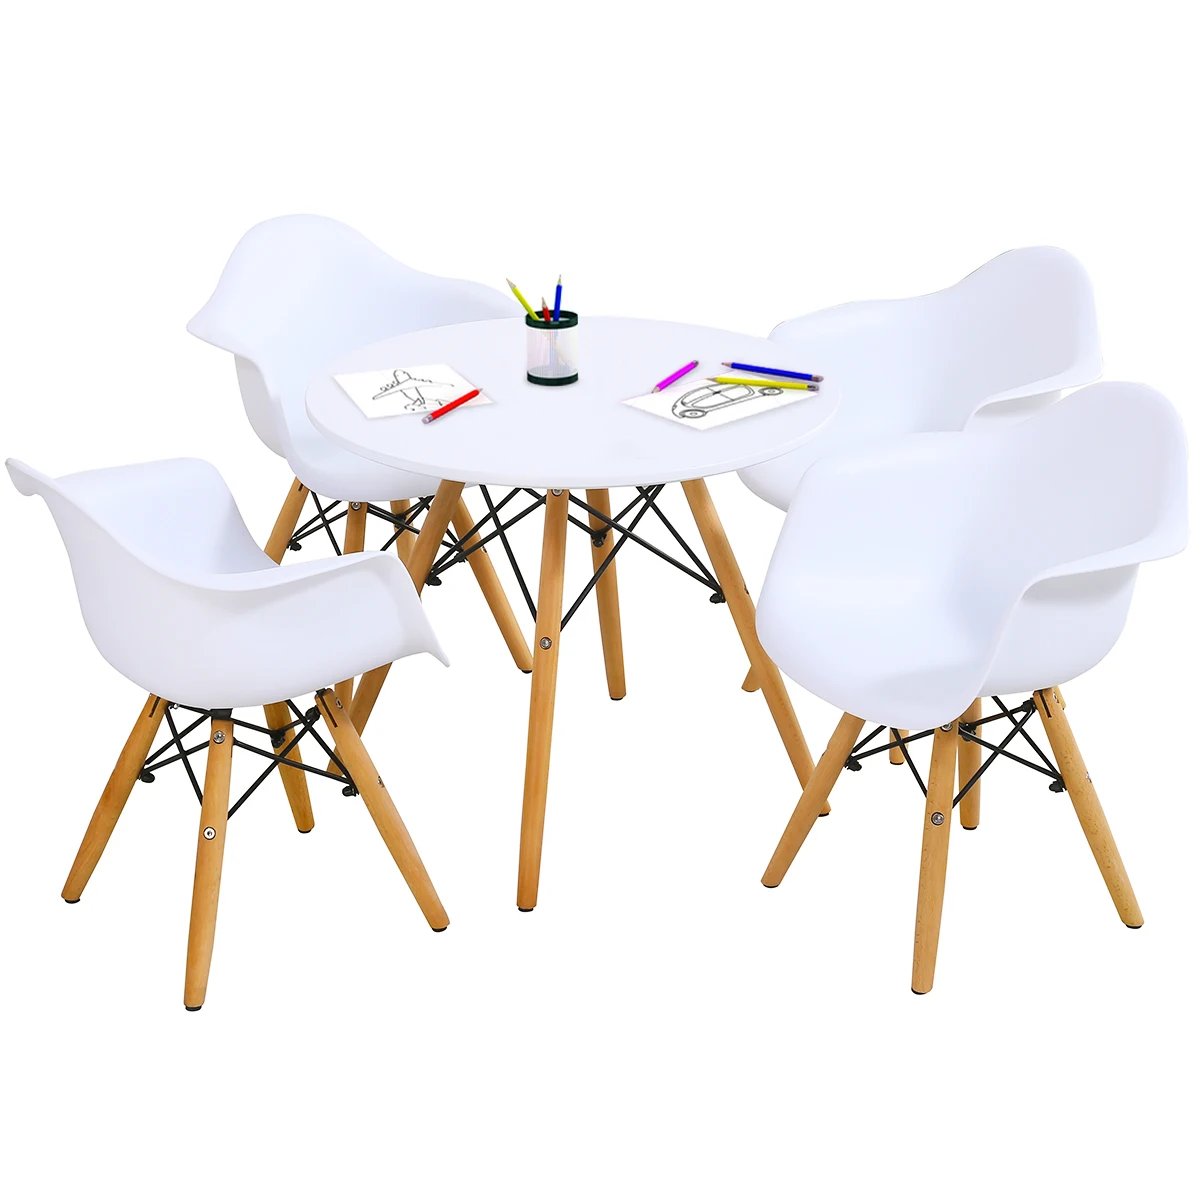 Kids Learning Dining Table &Chairs Set w/4 Chairs Solid Construction 5 pieces